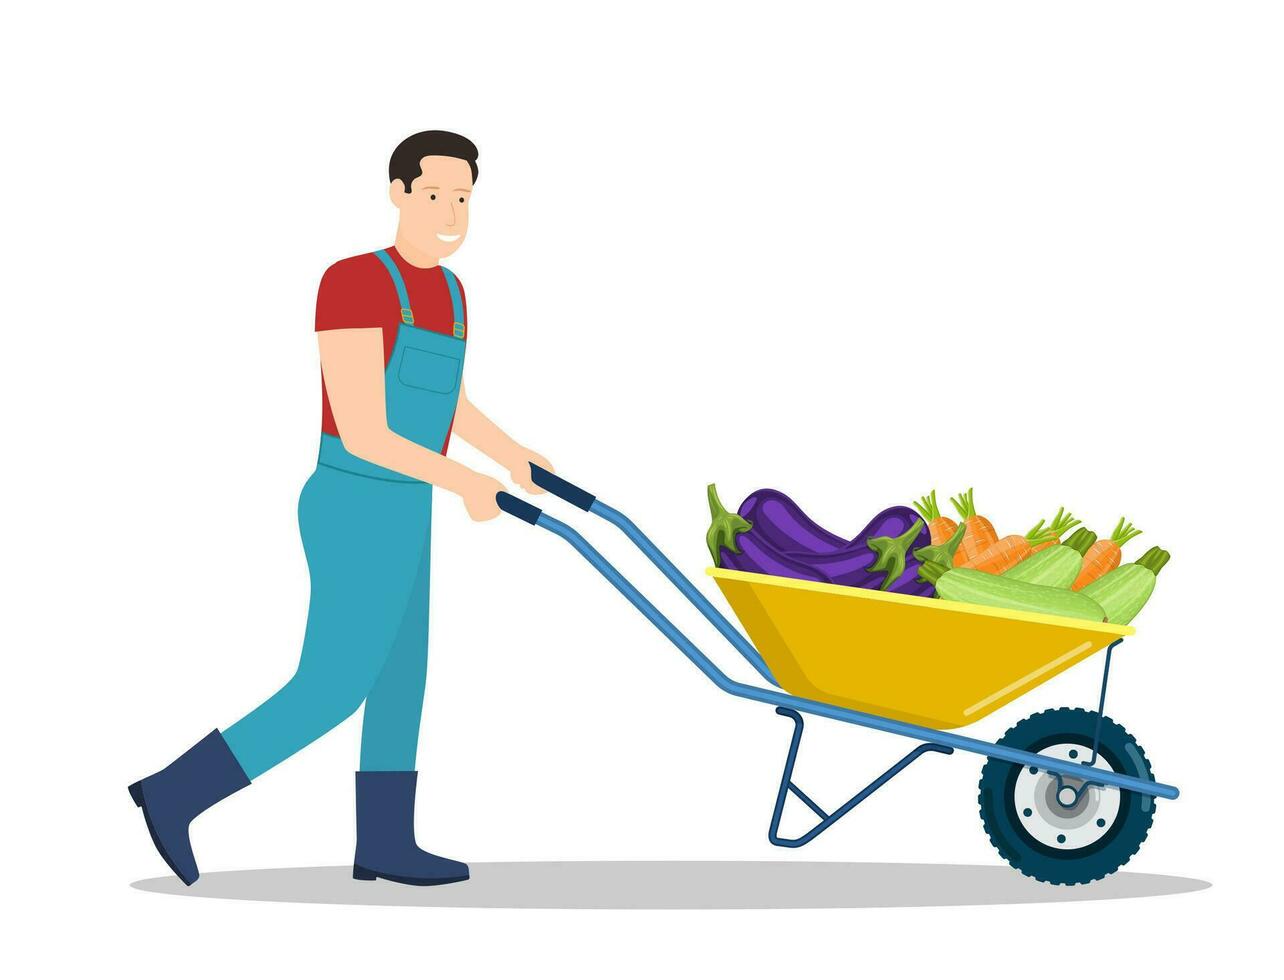 Farming man pushing wheelbarrow with zucchini, eggplant, carrot. Natural and tasty food. Organic farm products. male working on harvesting season. Vector illustration in flat style